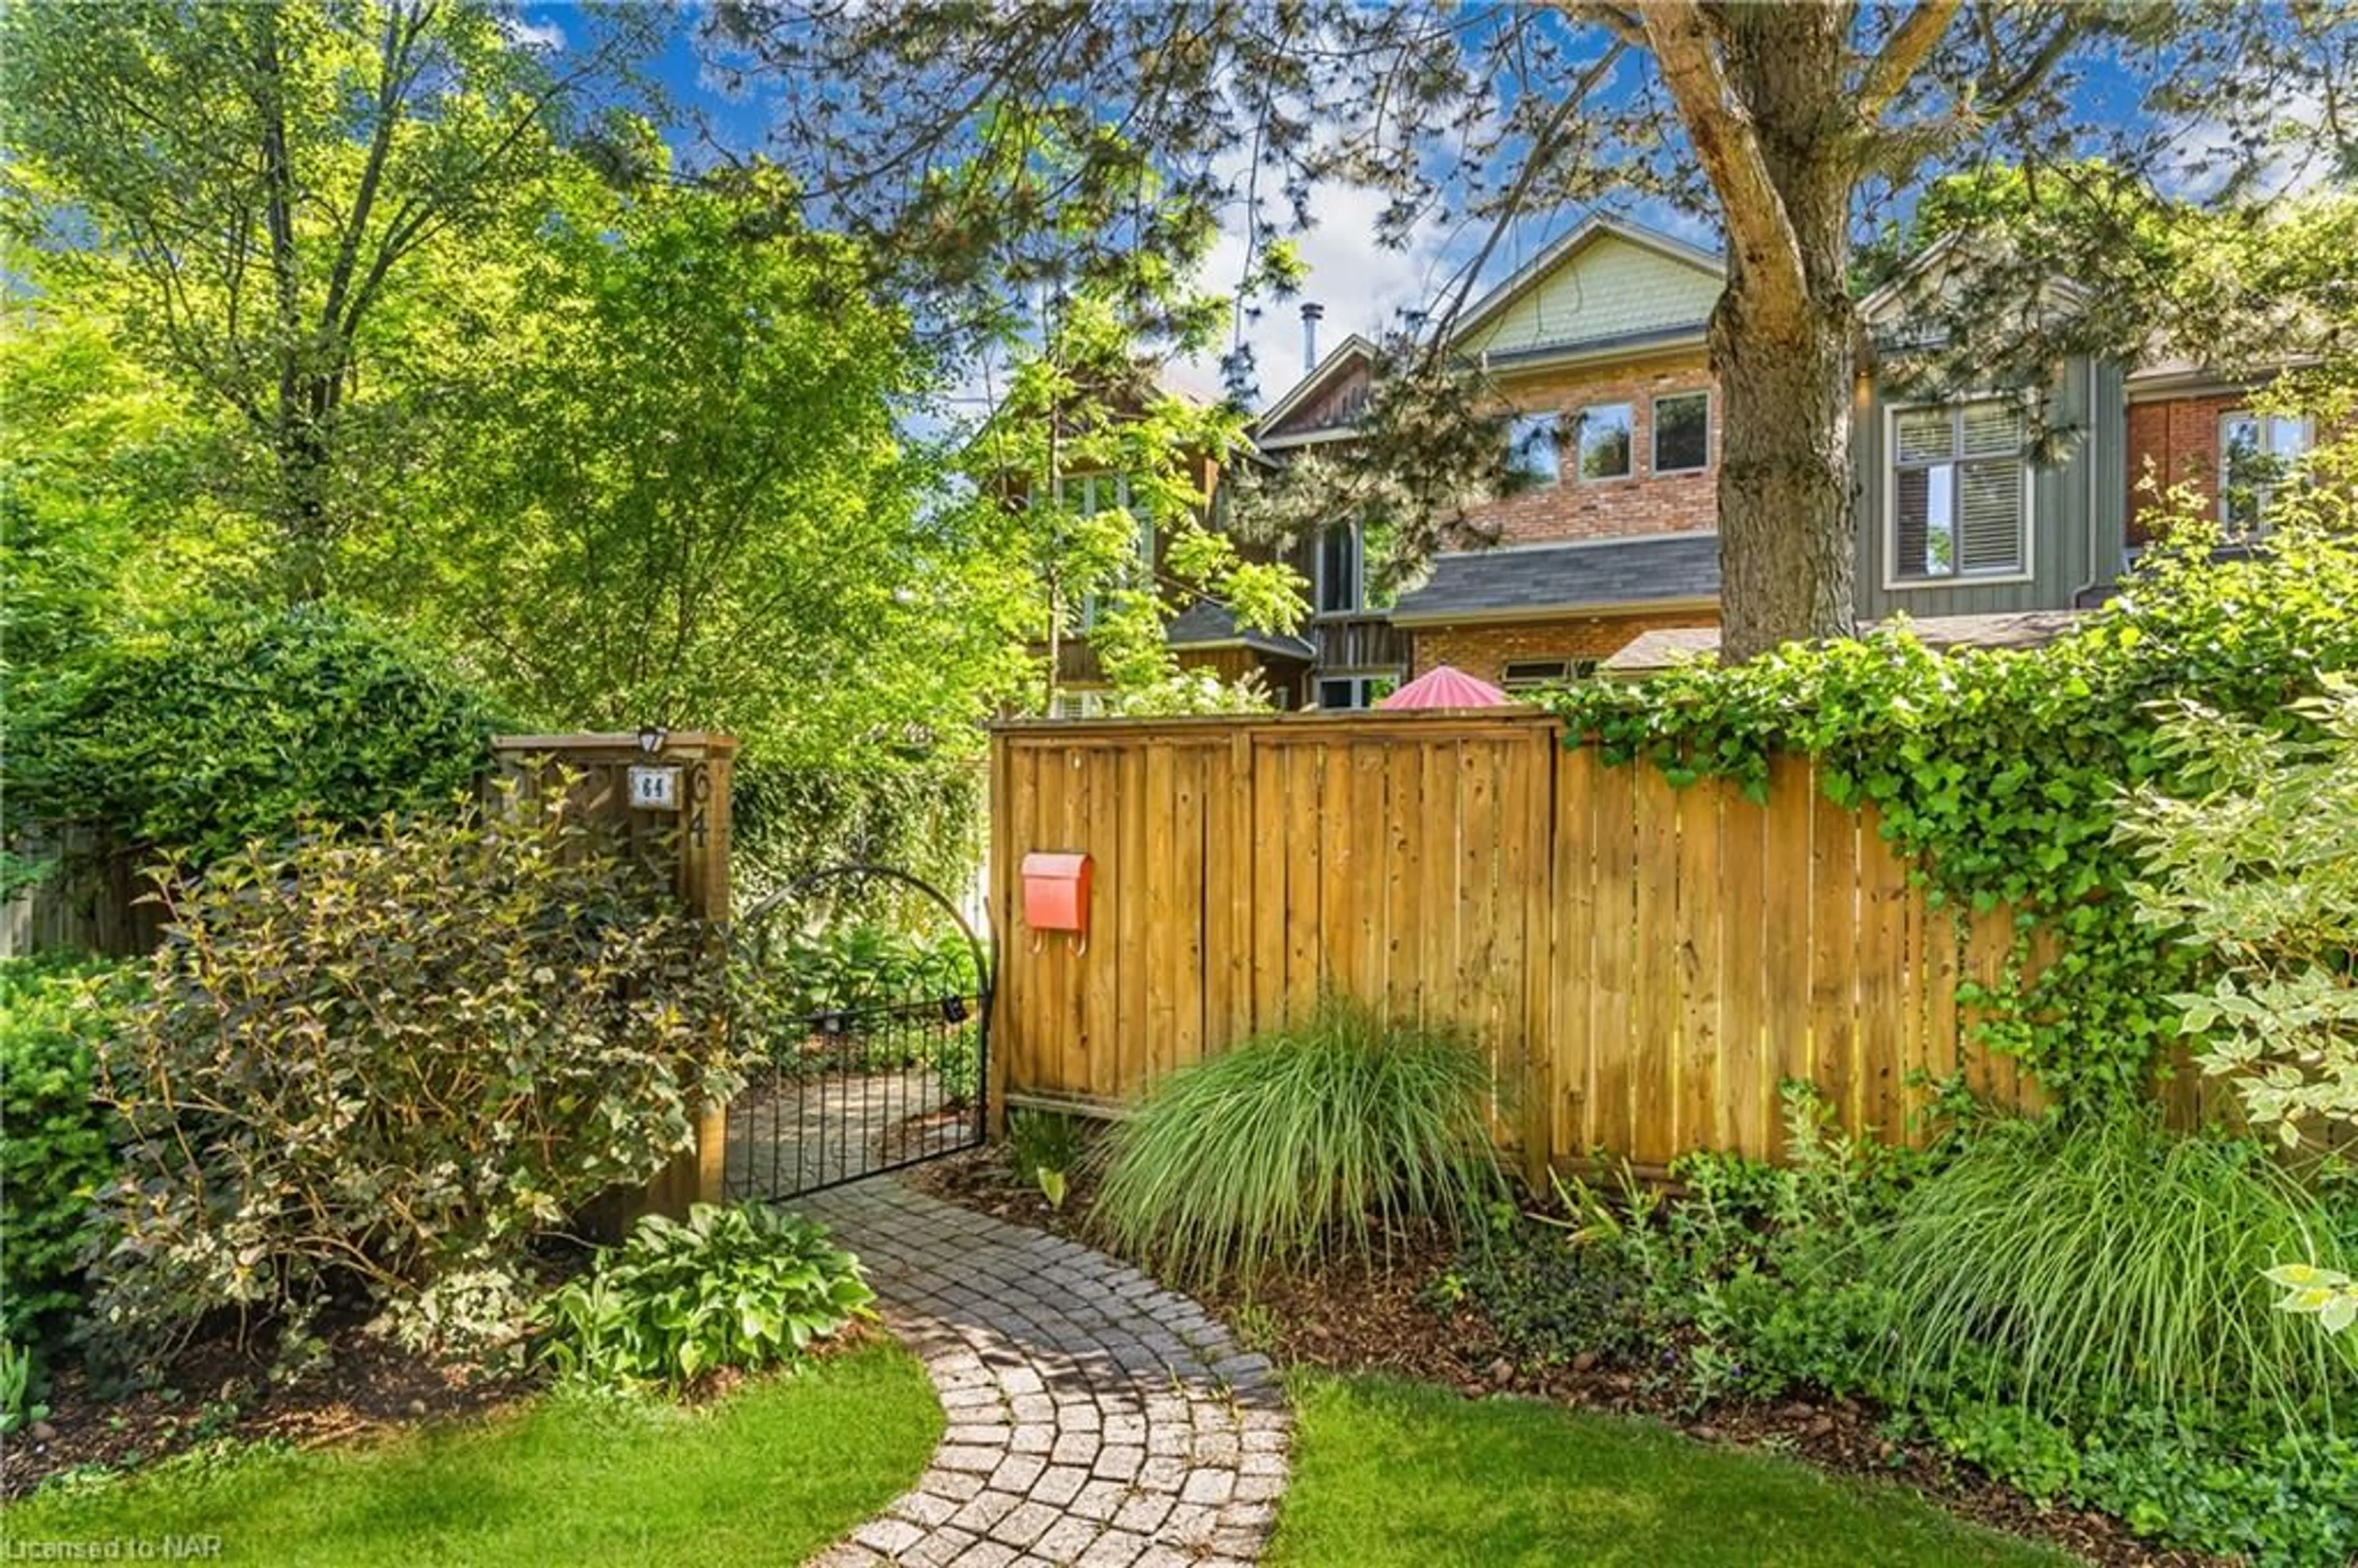 Fenced yard for 64 Yates St, St. Catharines Ontario L2R 5R8